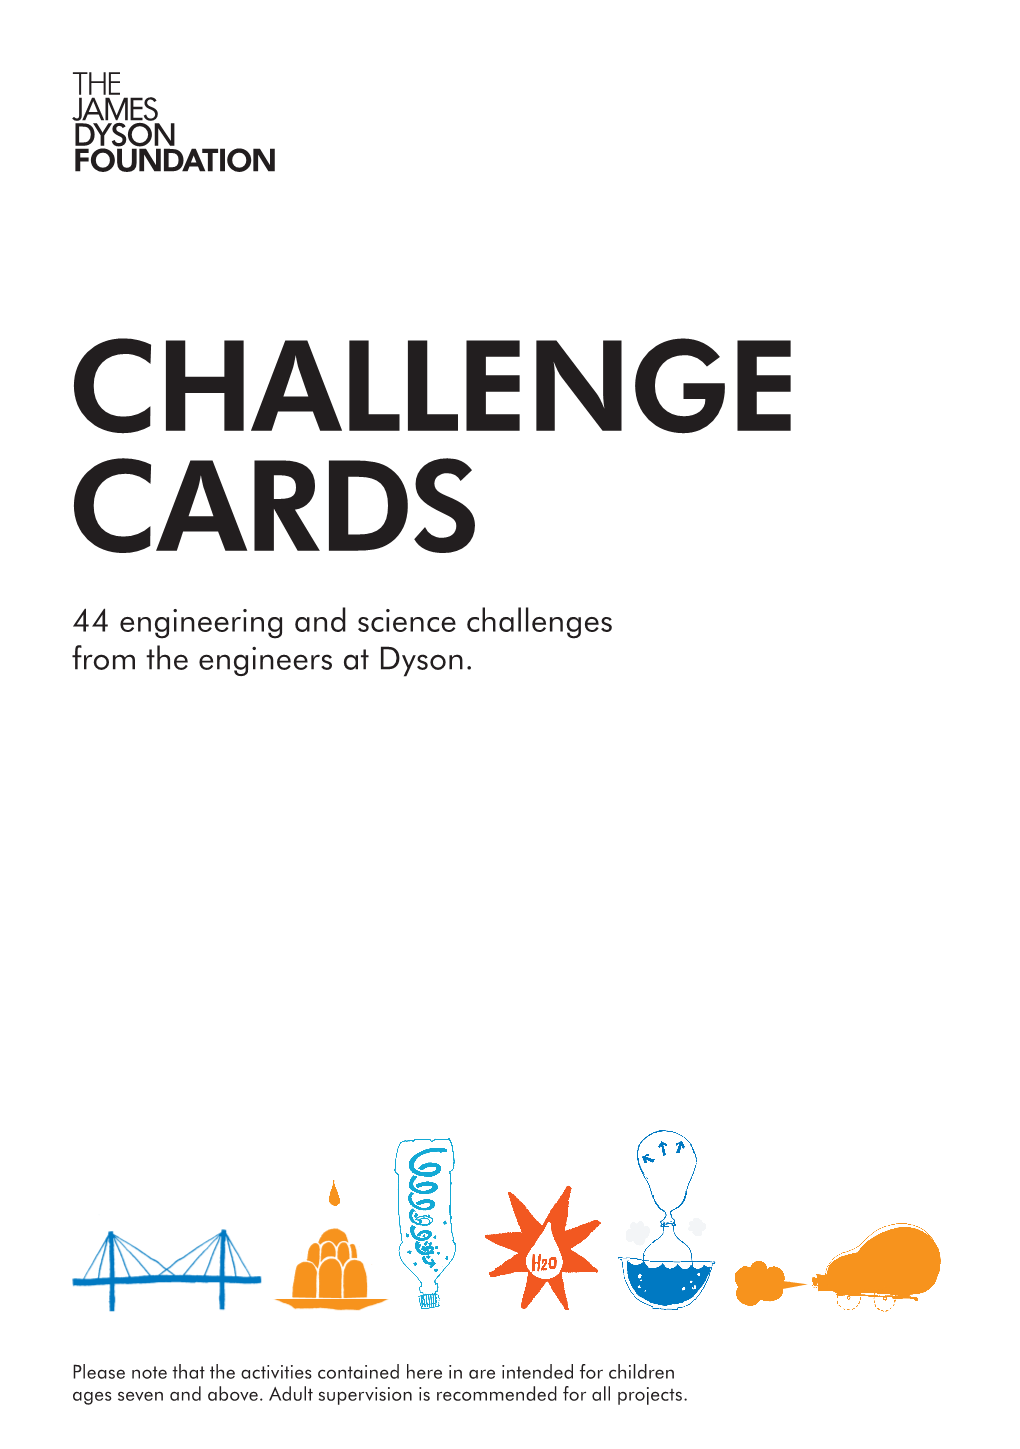 CHALLENGE CARDS 44 Engineering and Science Challenges from the Engineers at Dyson